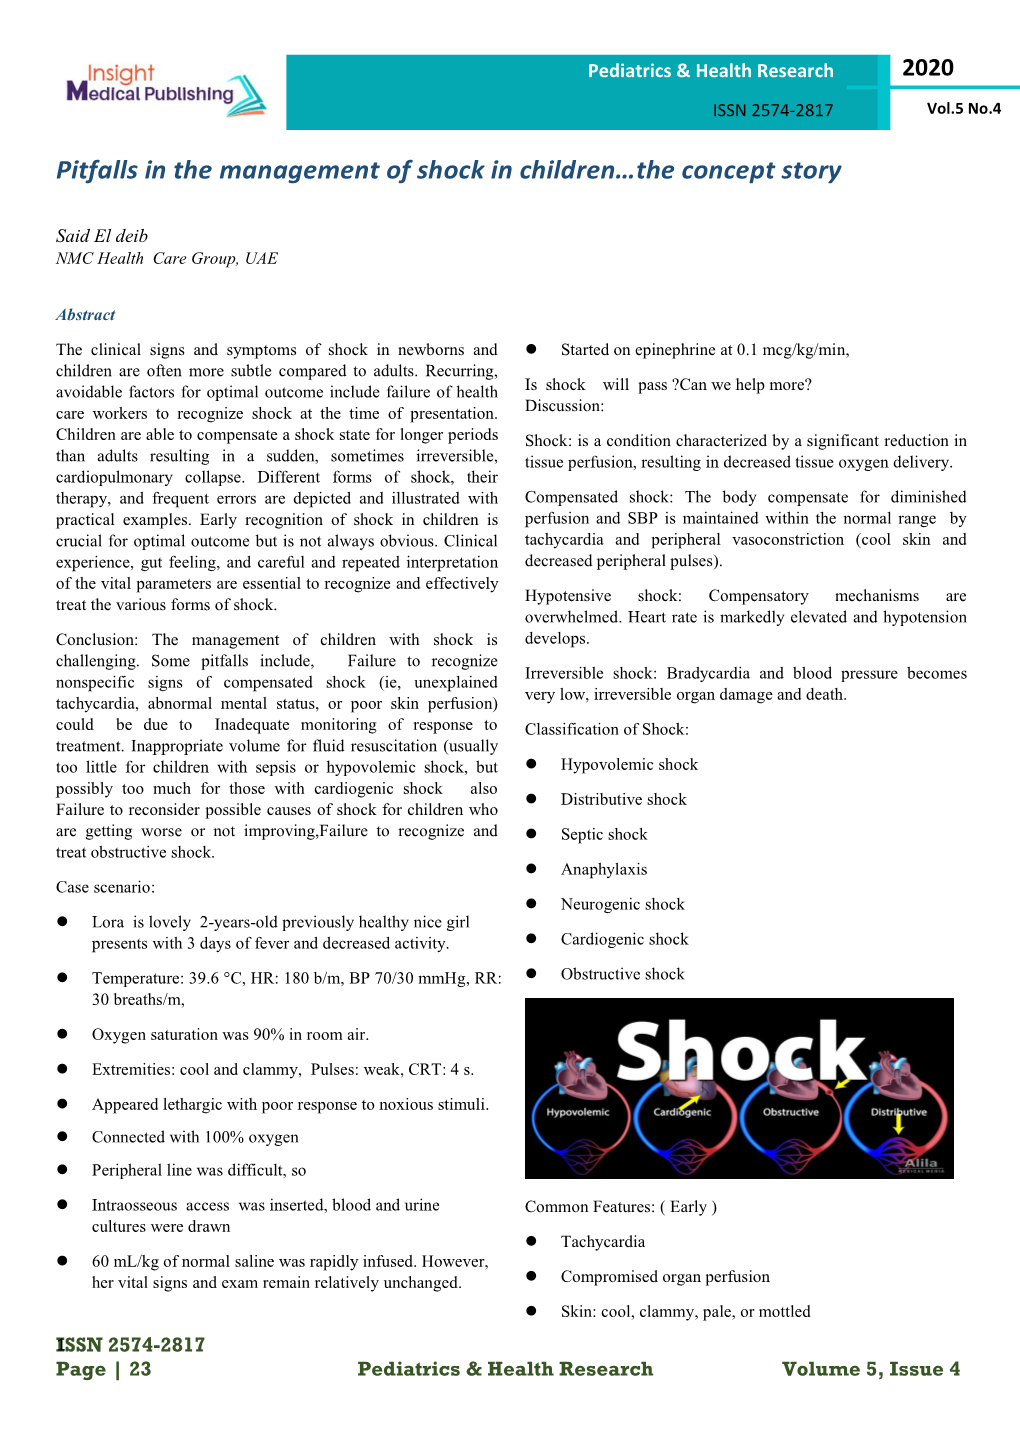 Pitfalls in the Management of Shock in Children…The Concept Story